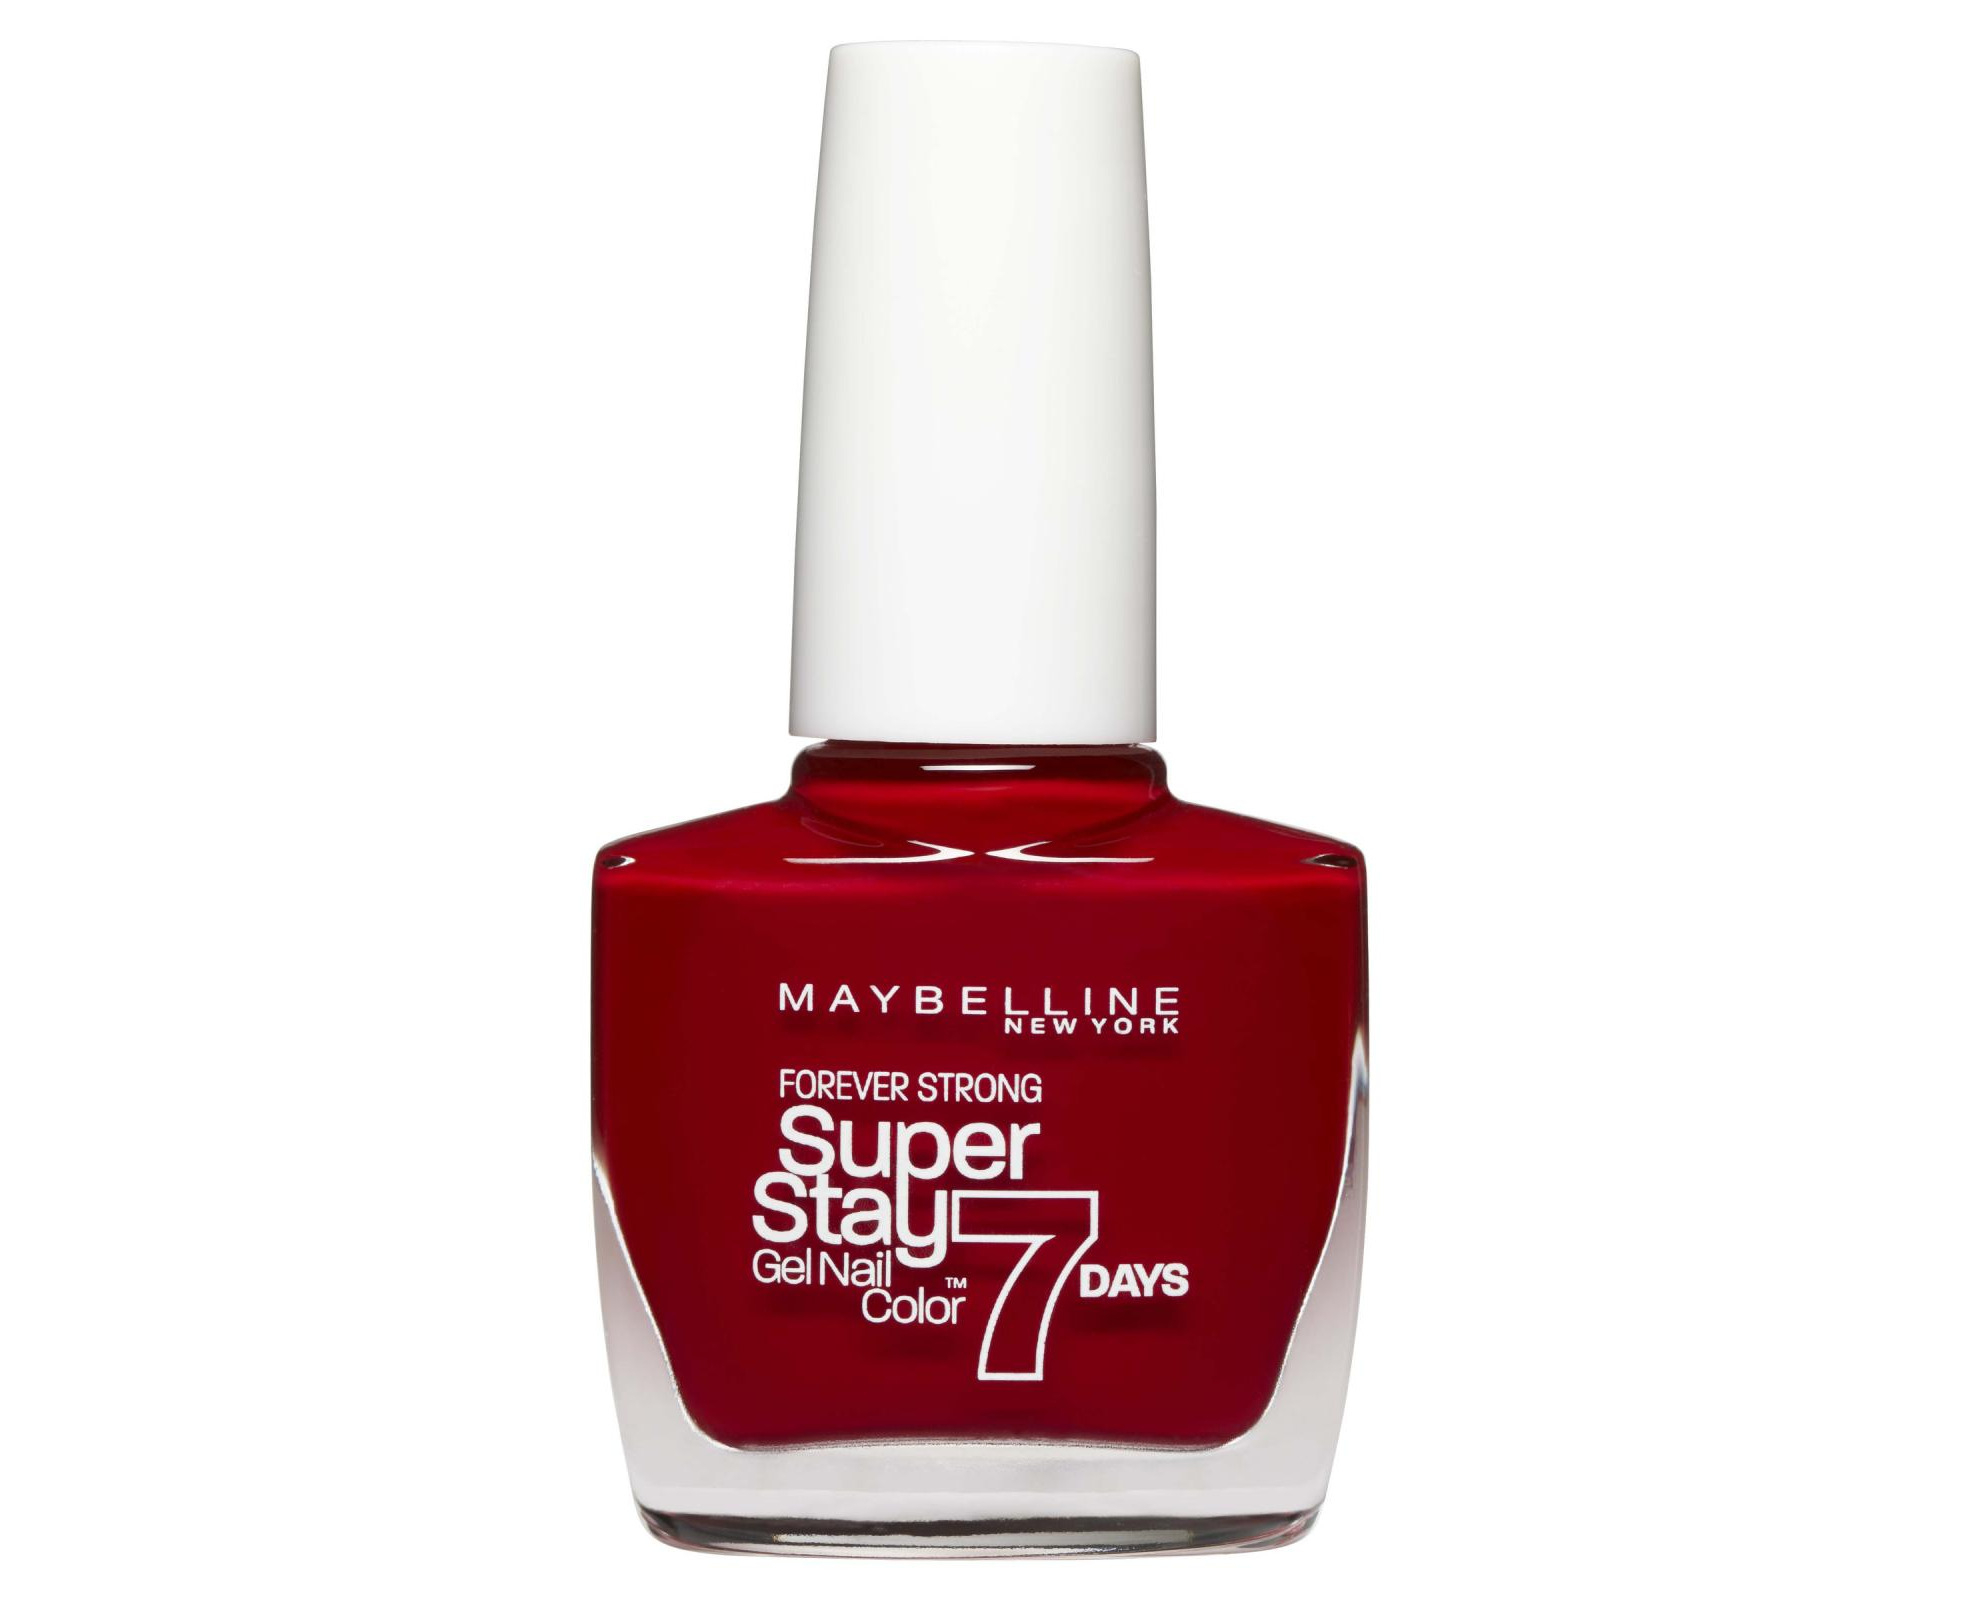 Maybelline Super Stay 7 Days Gel Nail Color - 06 Deep Red